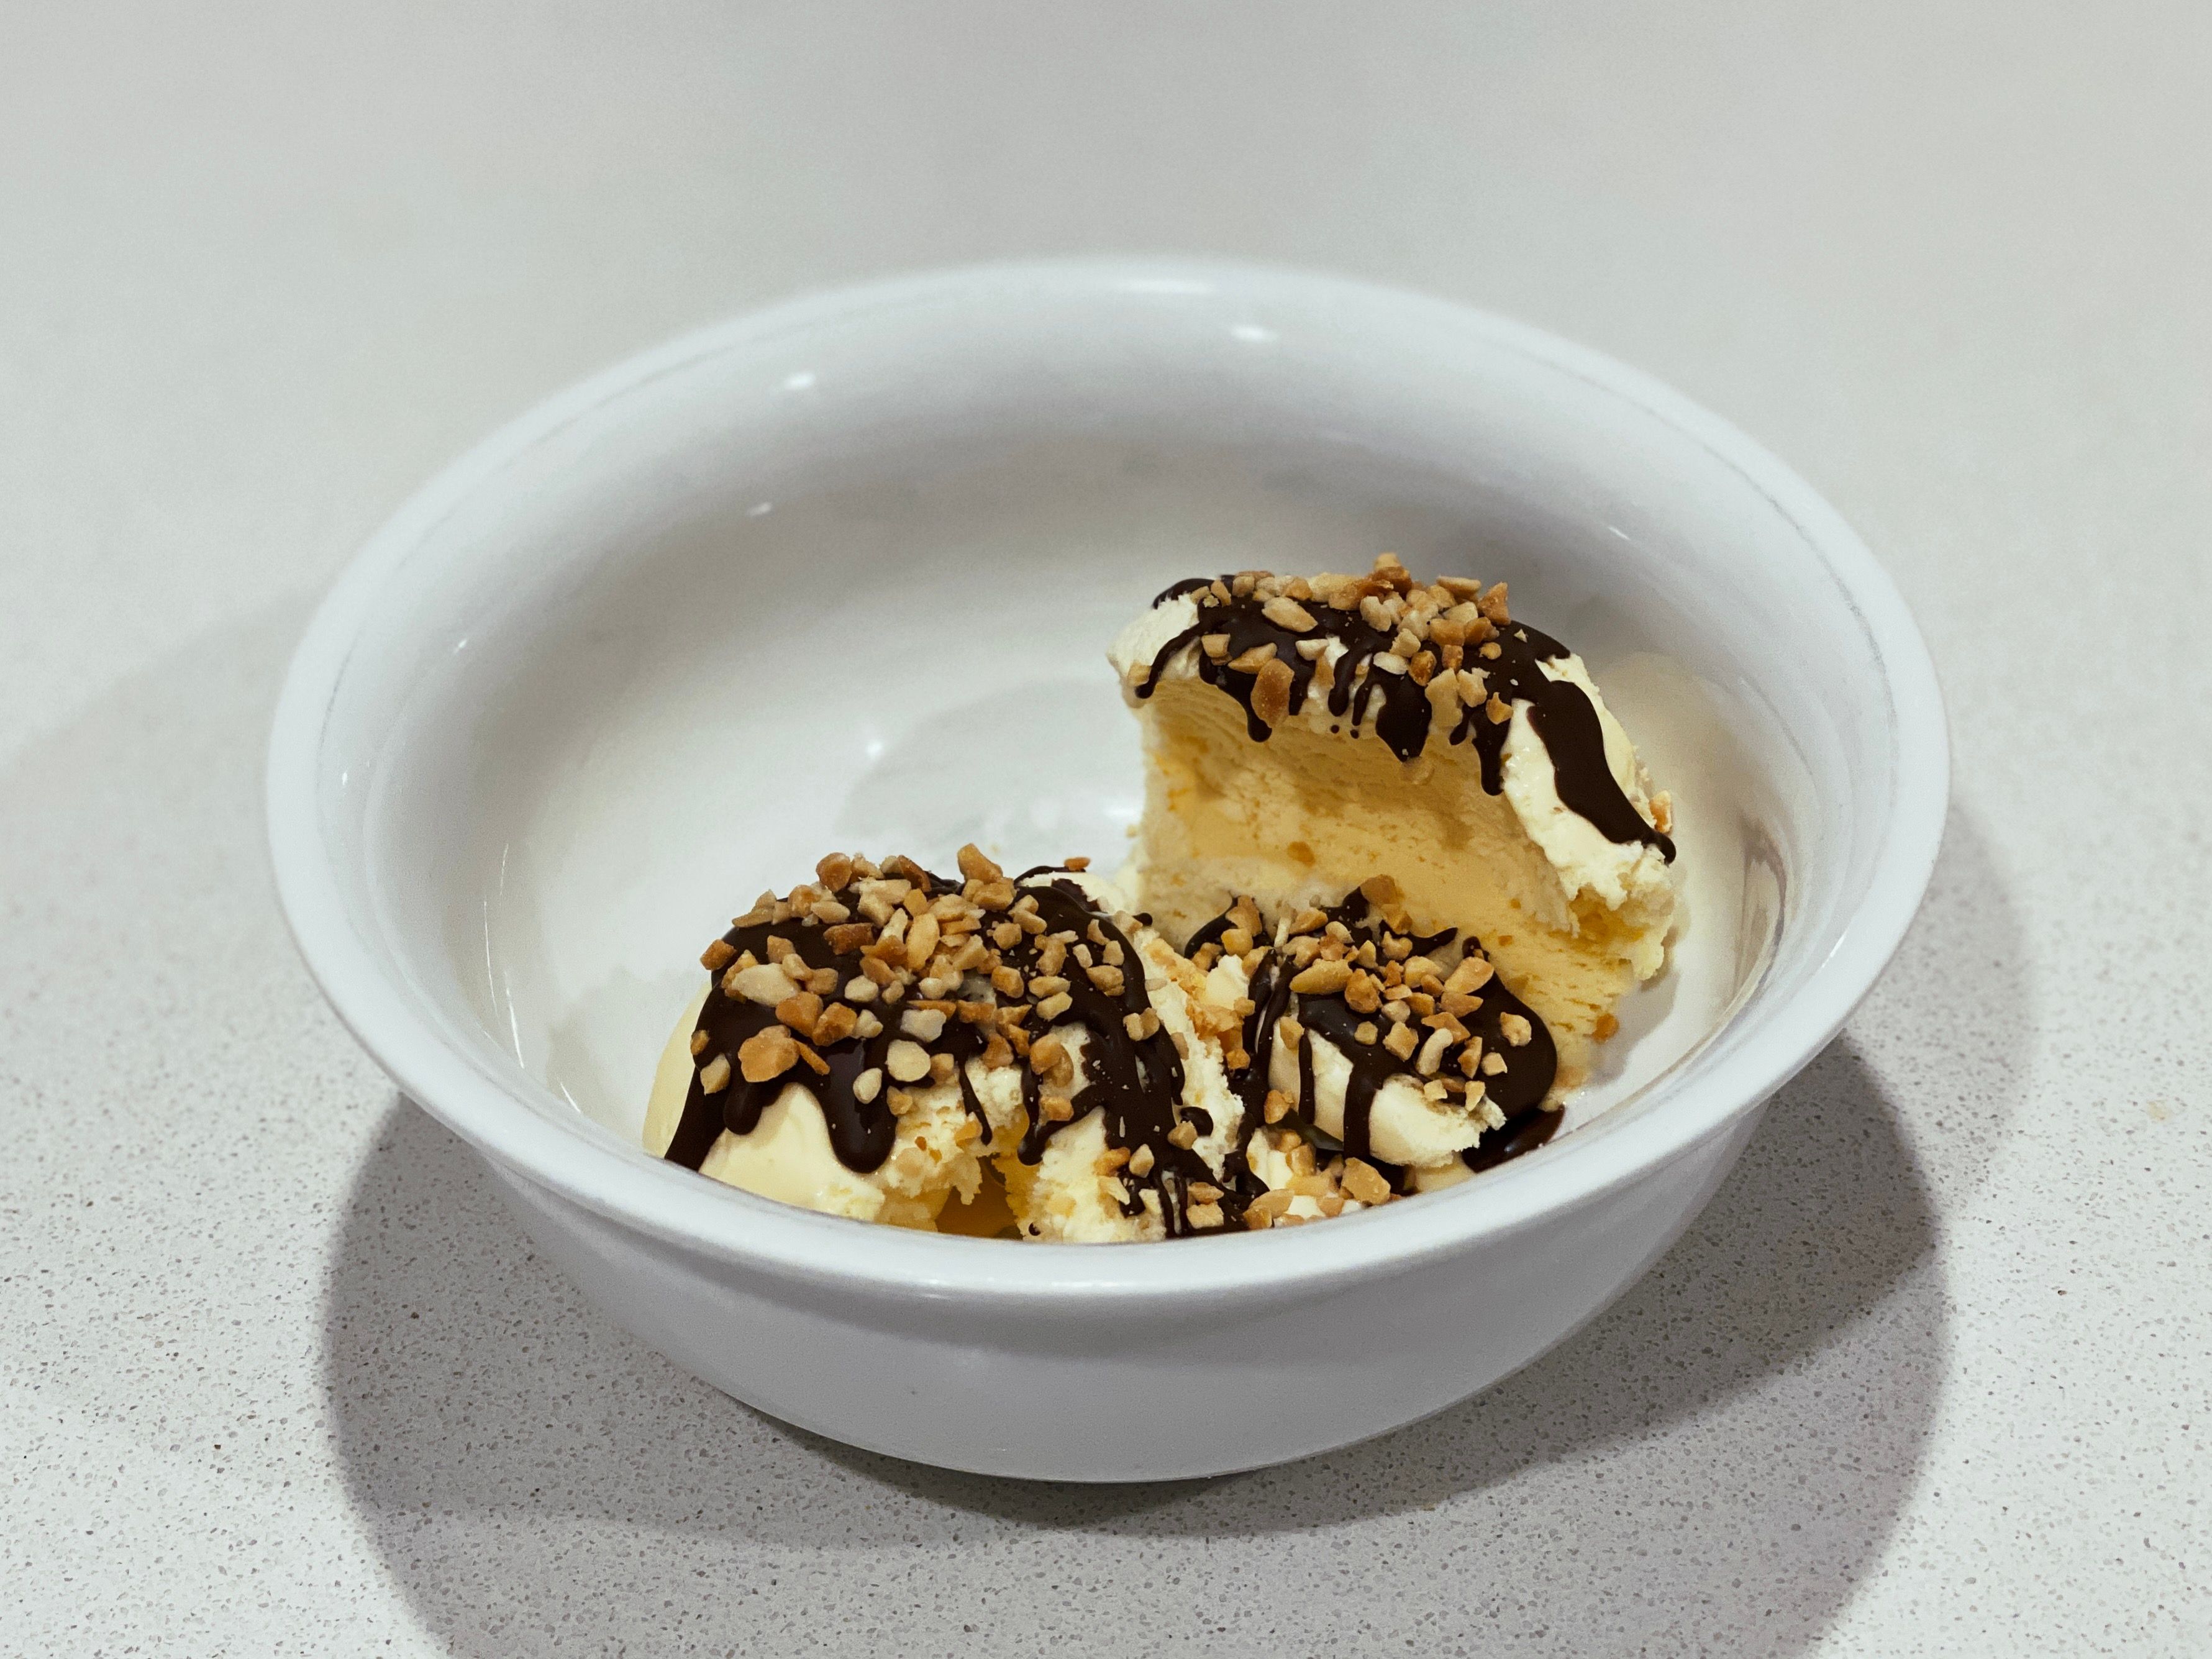 A photo of a bowl of vanilla ice cream topped with Ice Magic and crushed peanuts.